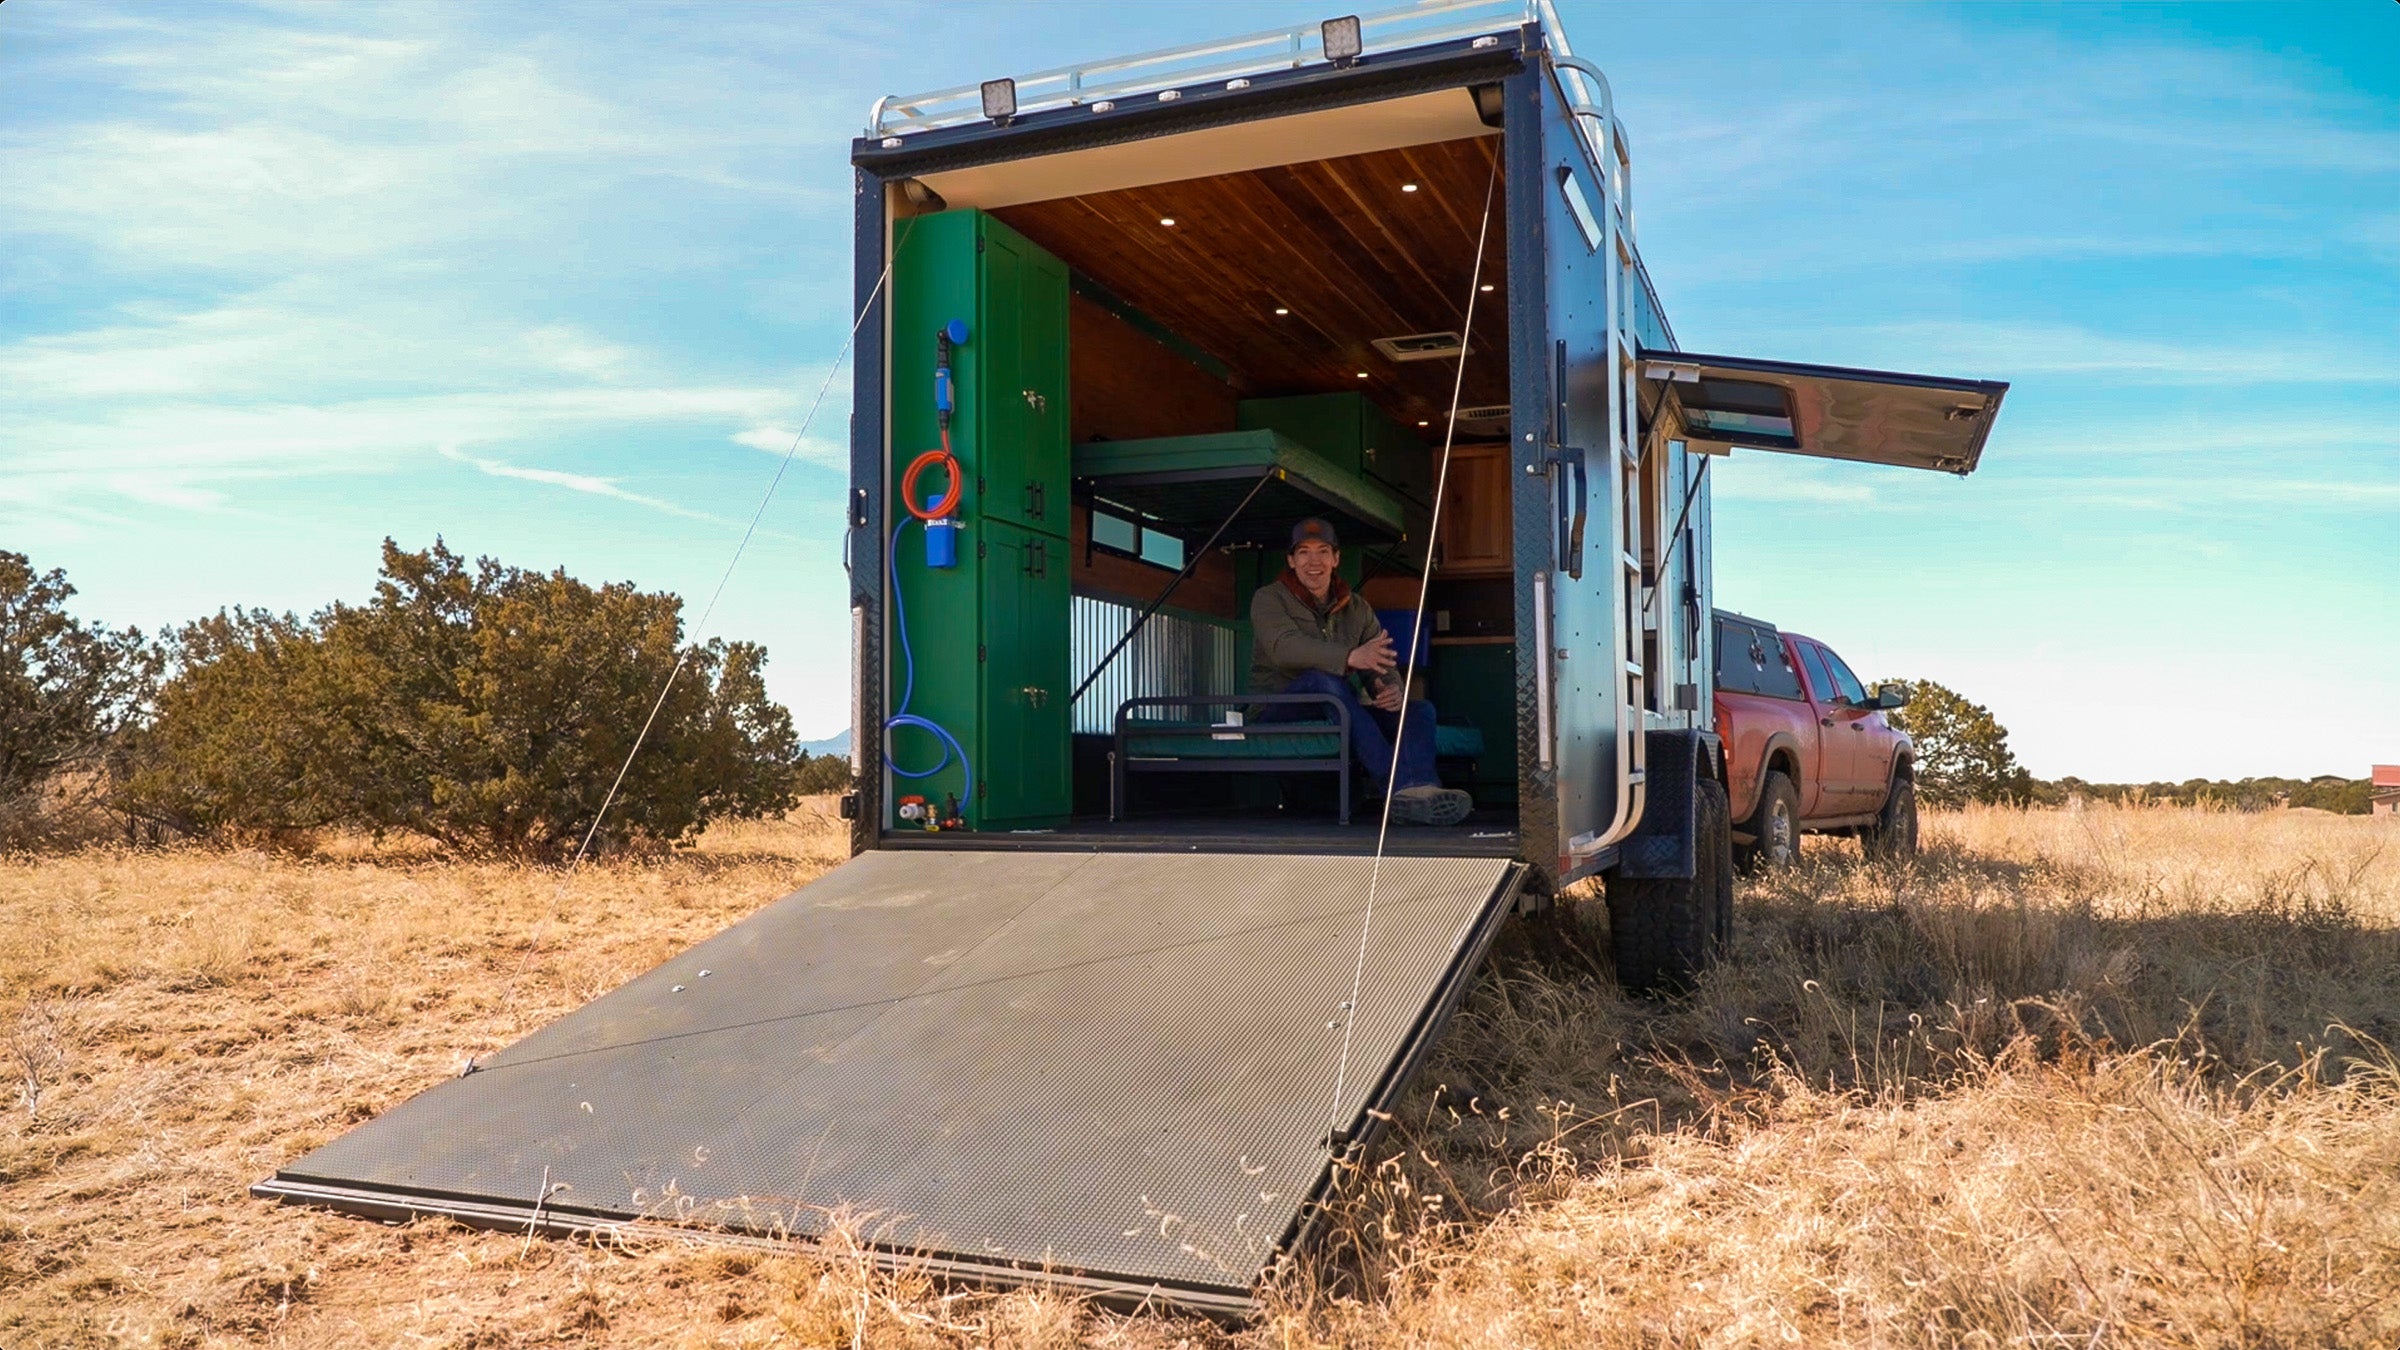 This Converted Cargo Trailer Could Be Your Ultimate Adventure Base Camp -  Outside Online